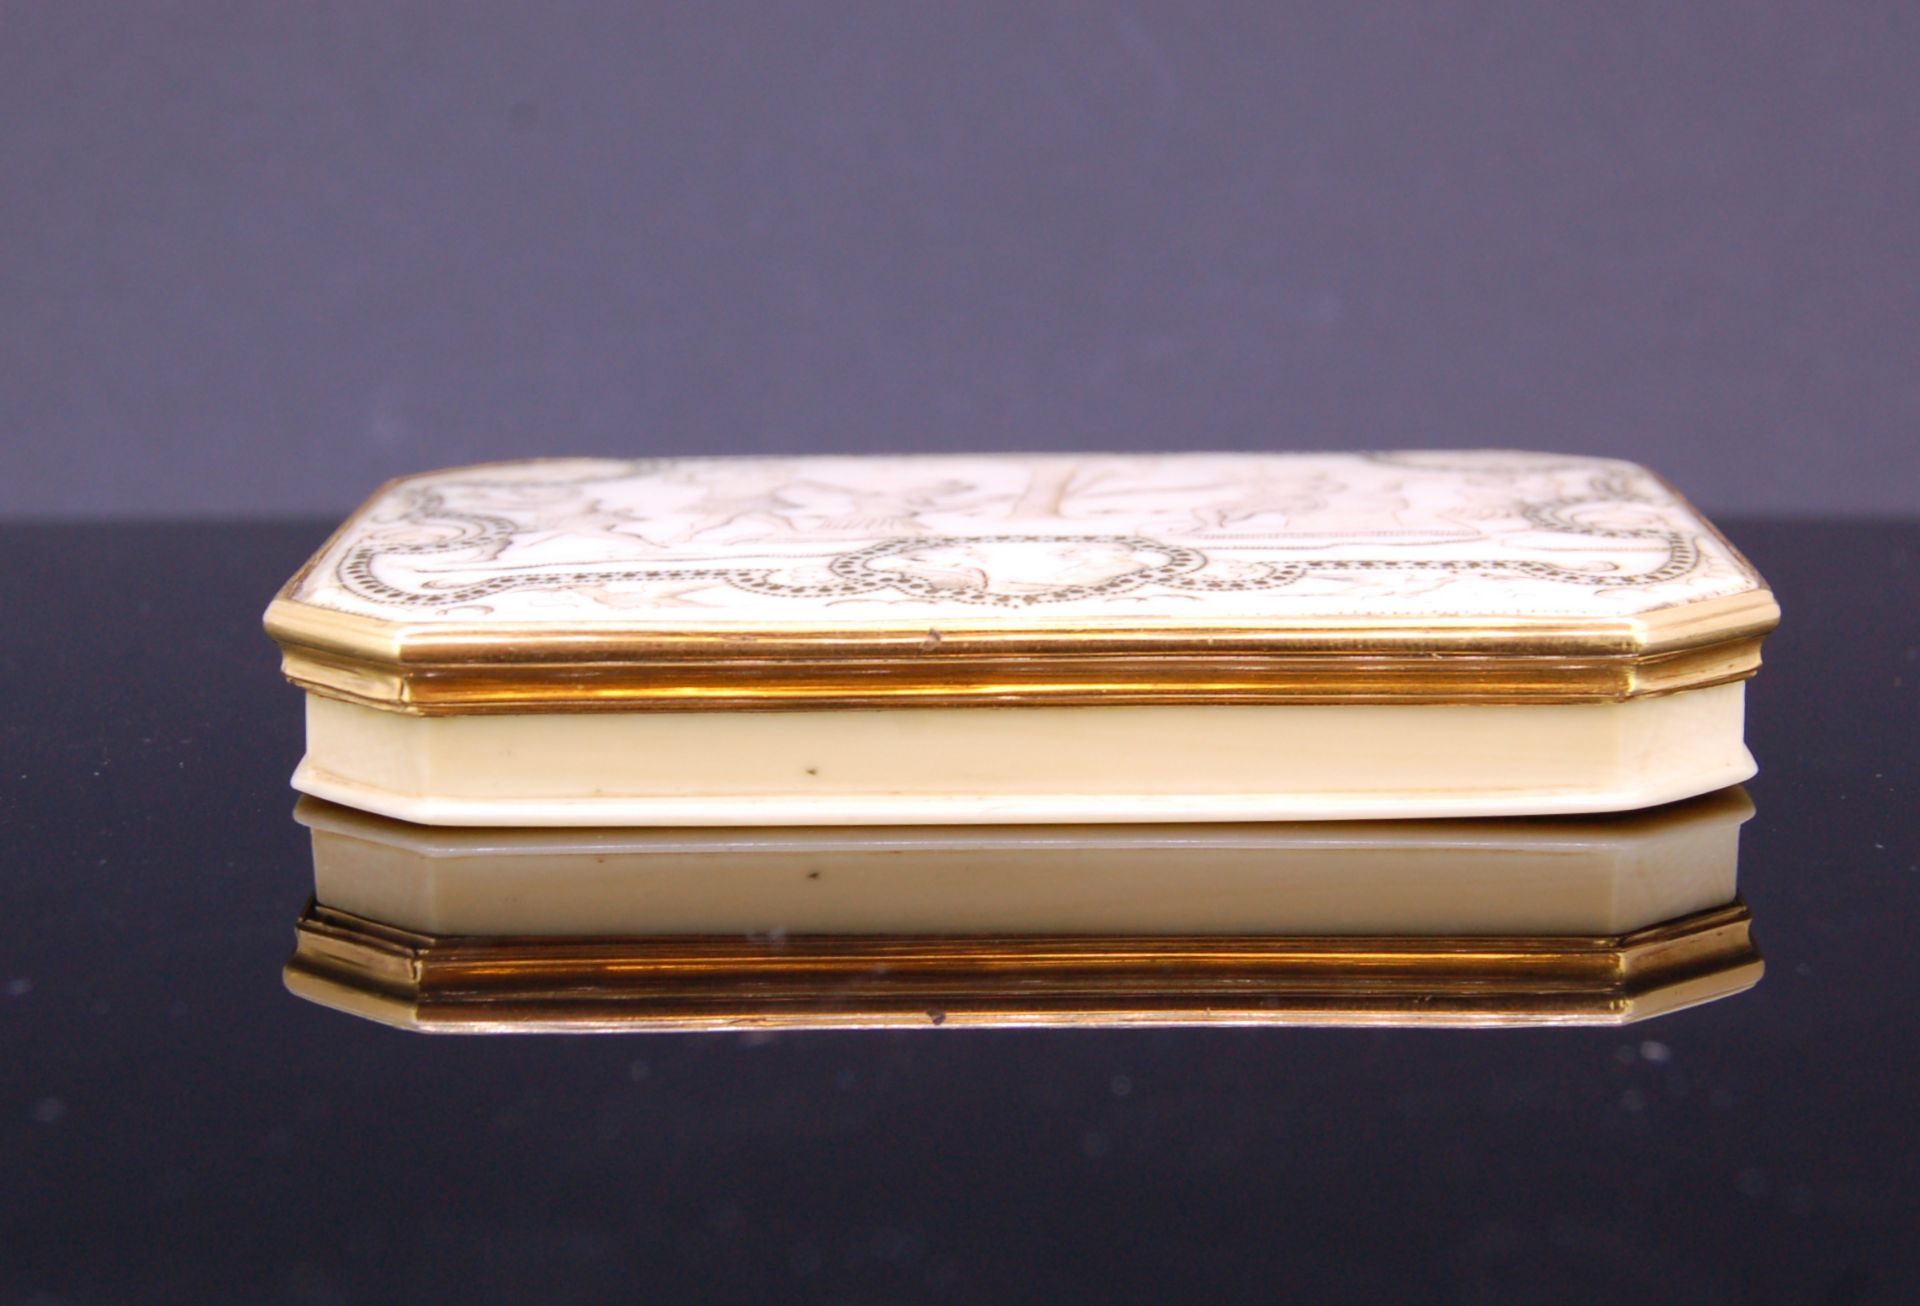 18th CENTURY RECTANGULAR SNUFFBOX WITH GOLD MOUNT - Image 2 of 3